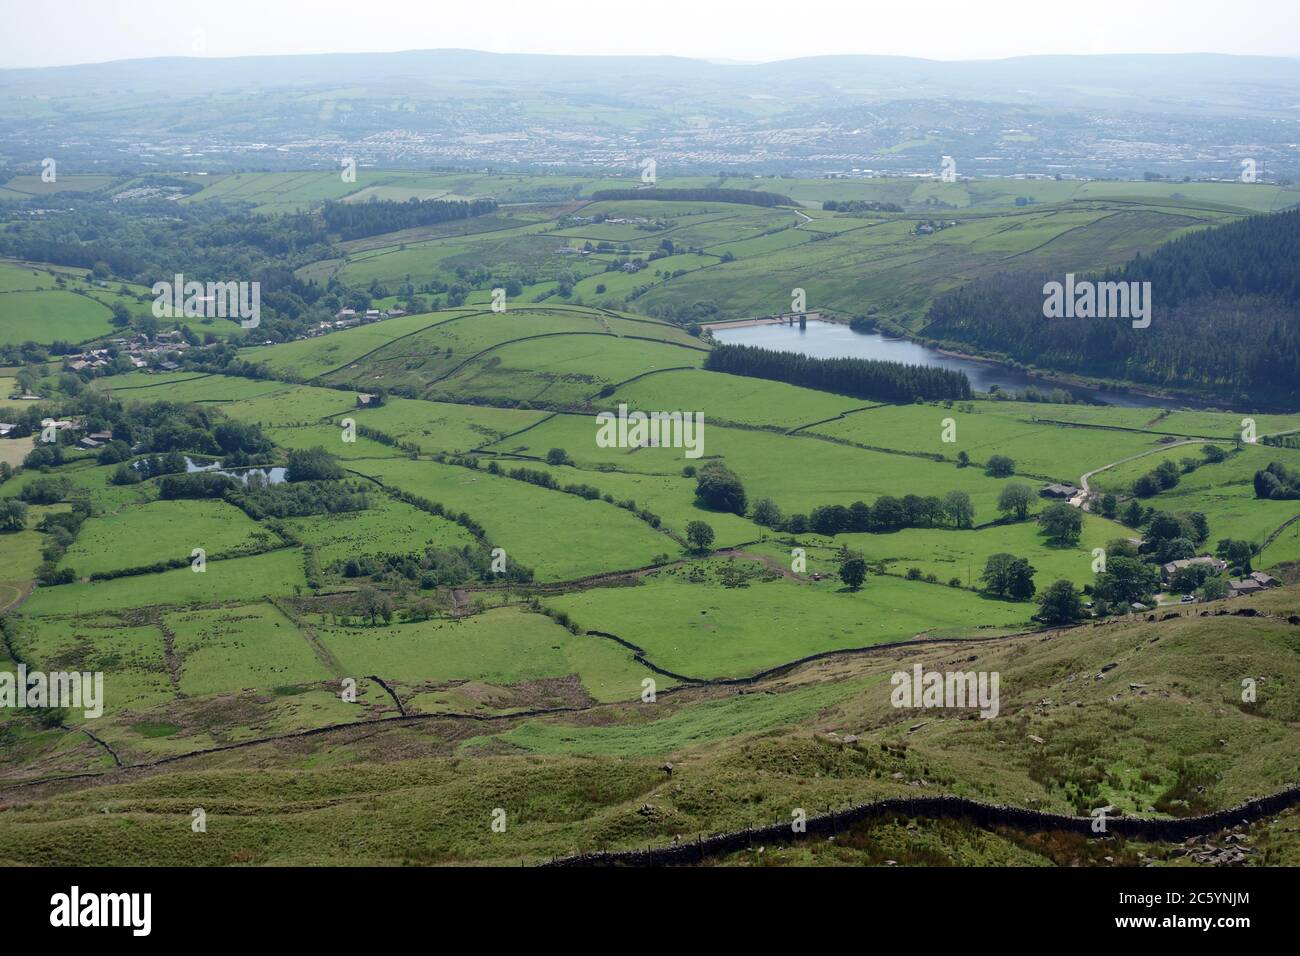 Lower Ogden Reservoir & the Village of Barley from near the Summit of Pendle Hill, Lancashire, England, UK. Stock Photo